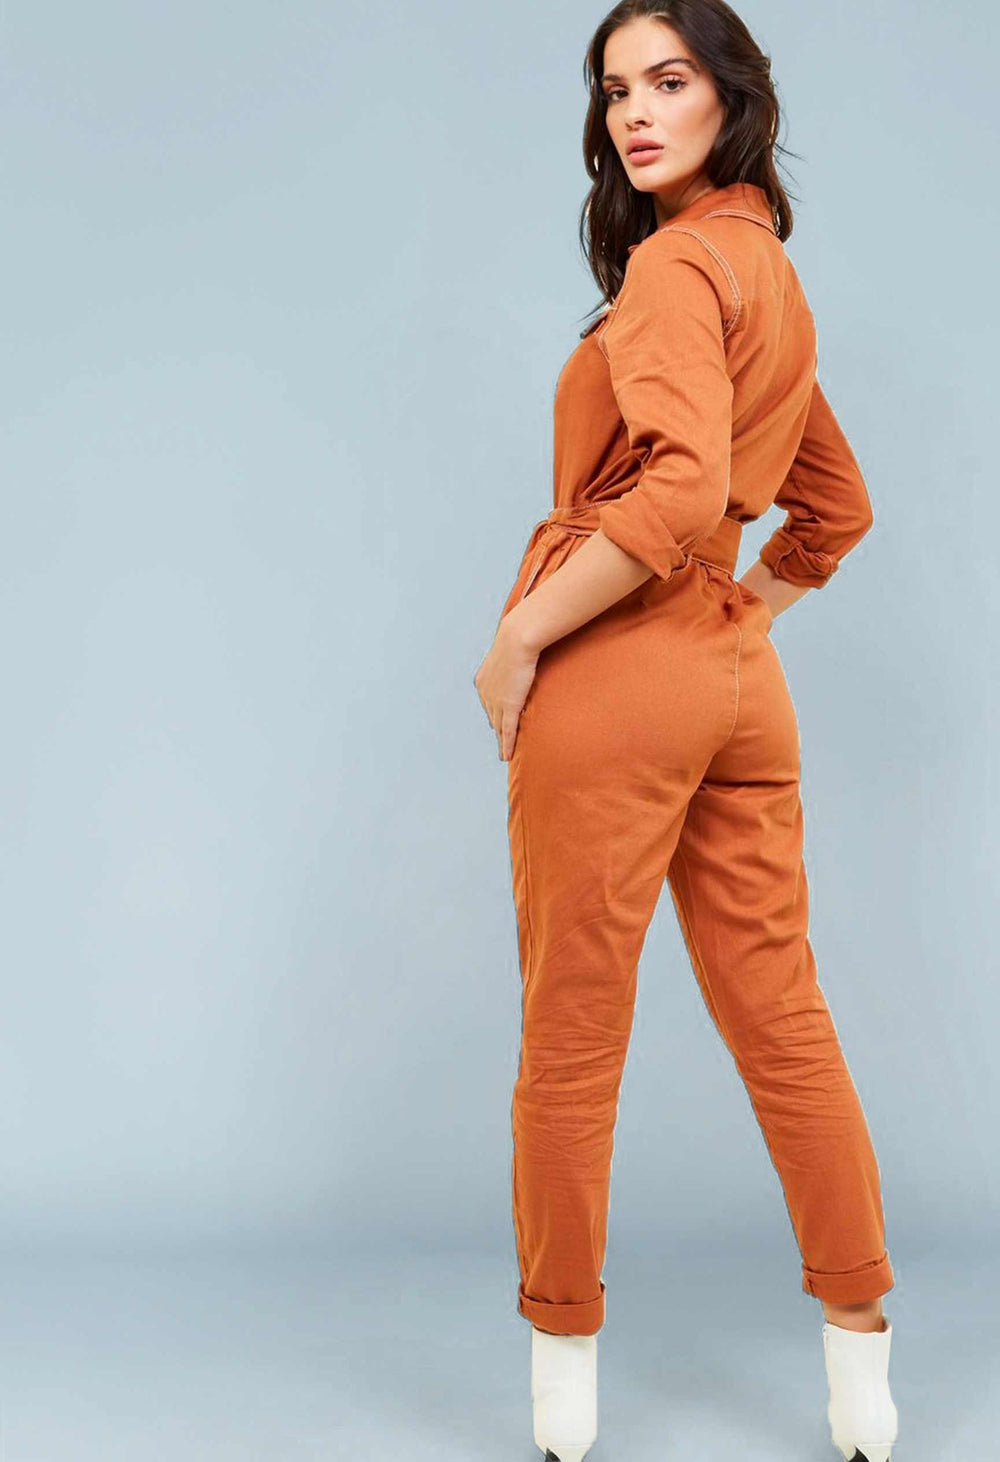 Our Lady of Leisure Gimlet Boilersuit